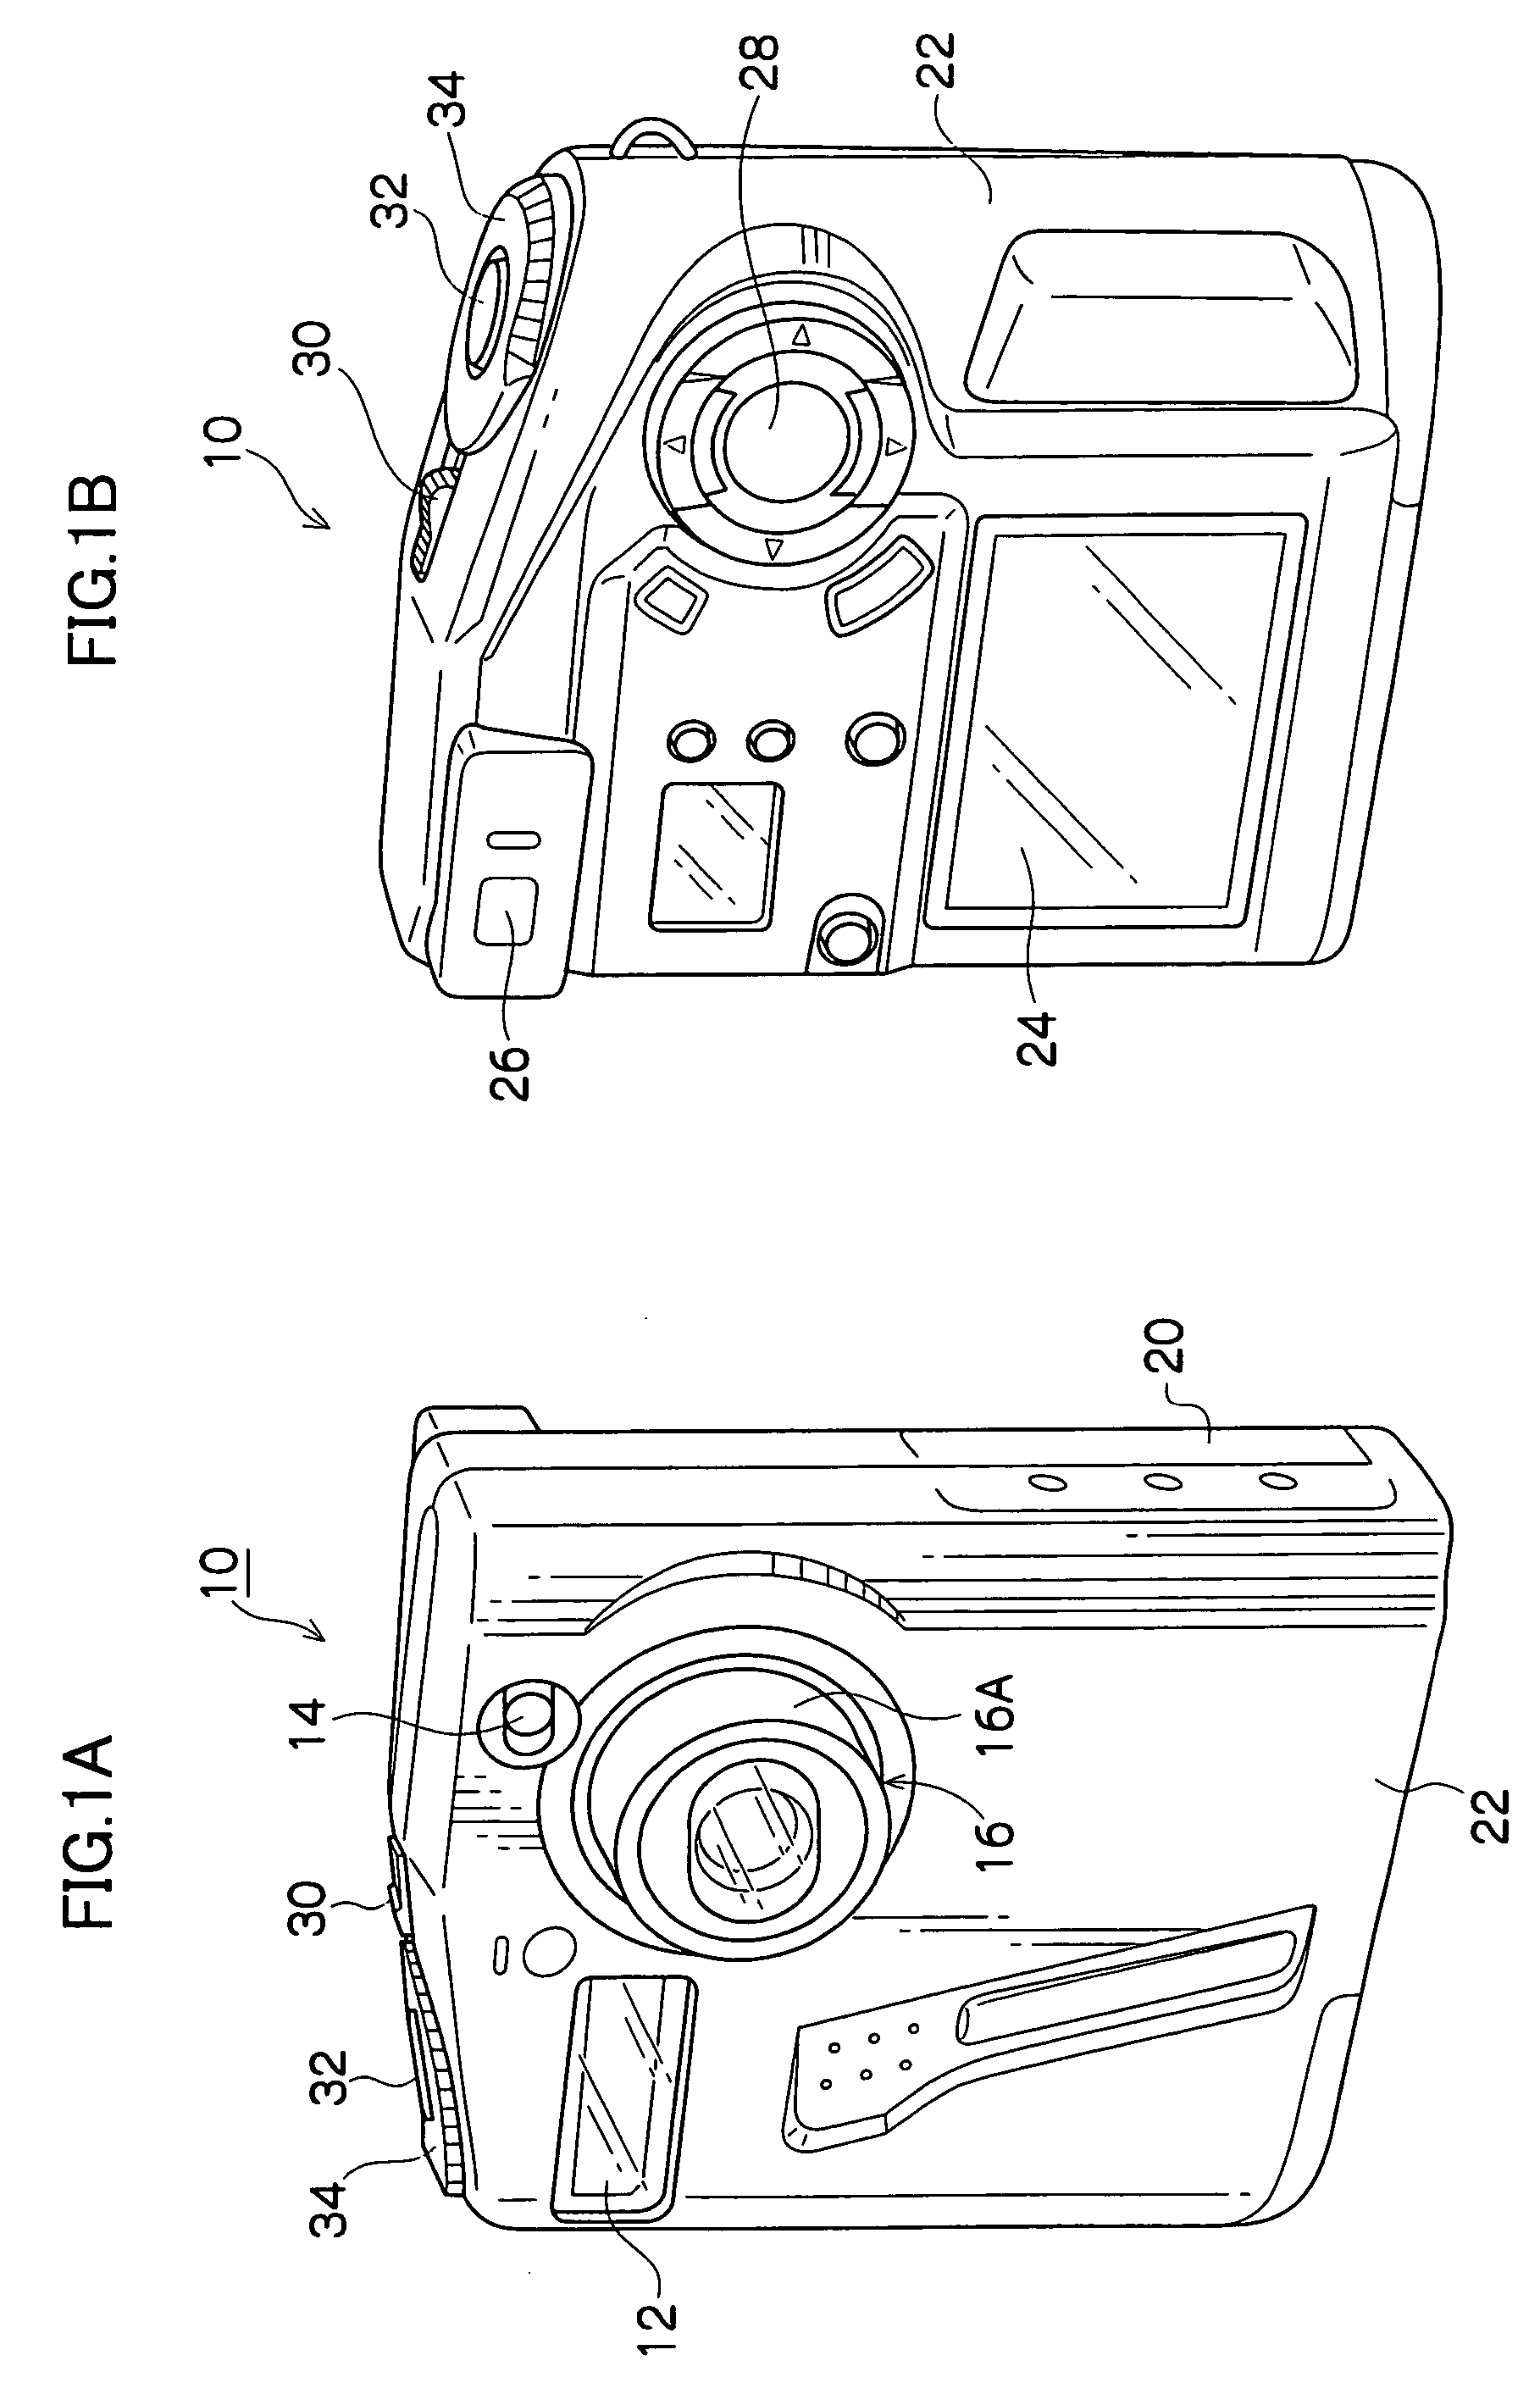 Image capture device and image data correction process of image capture device